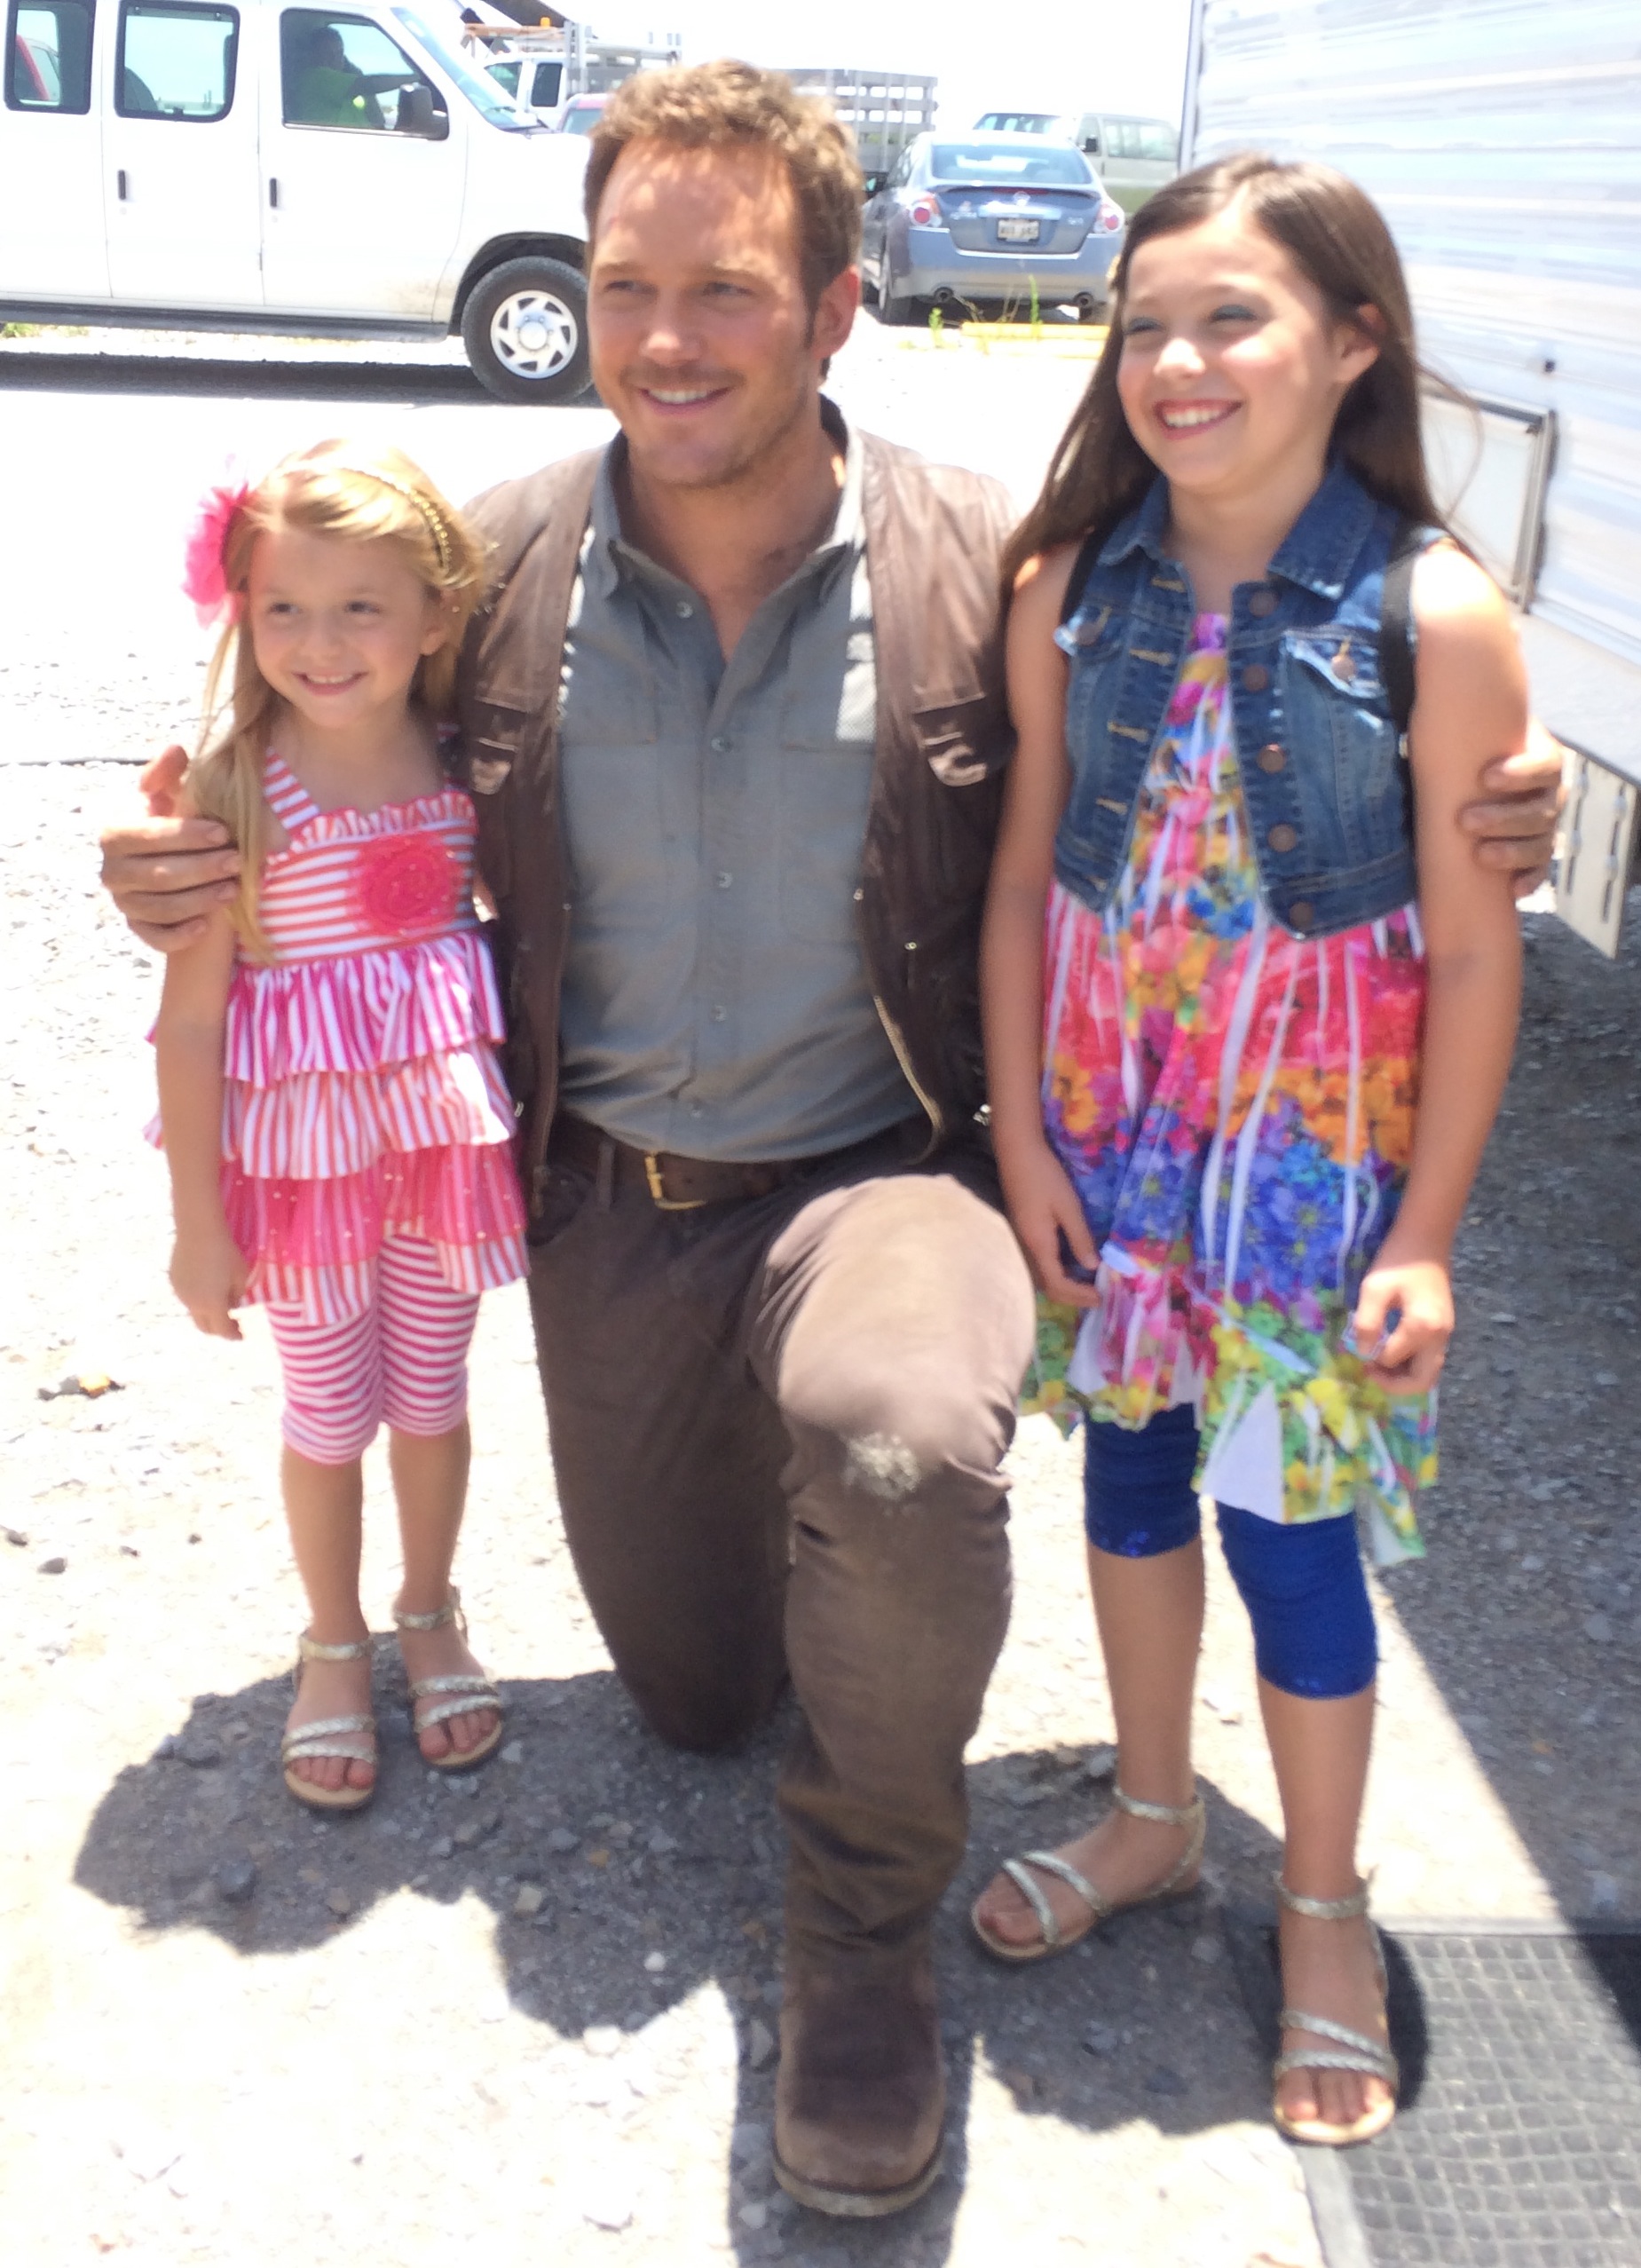 Chloe and Caitlyn Camille Perrin with Chris Pratt on the set of Jurassic World.